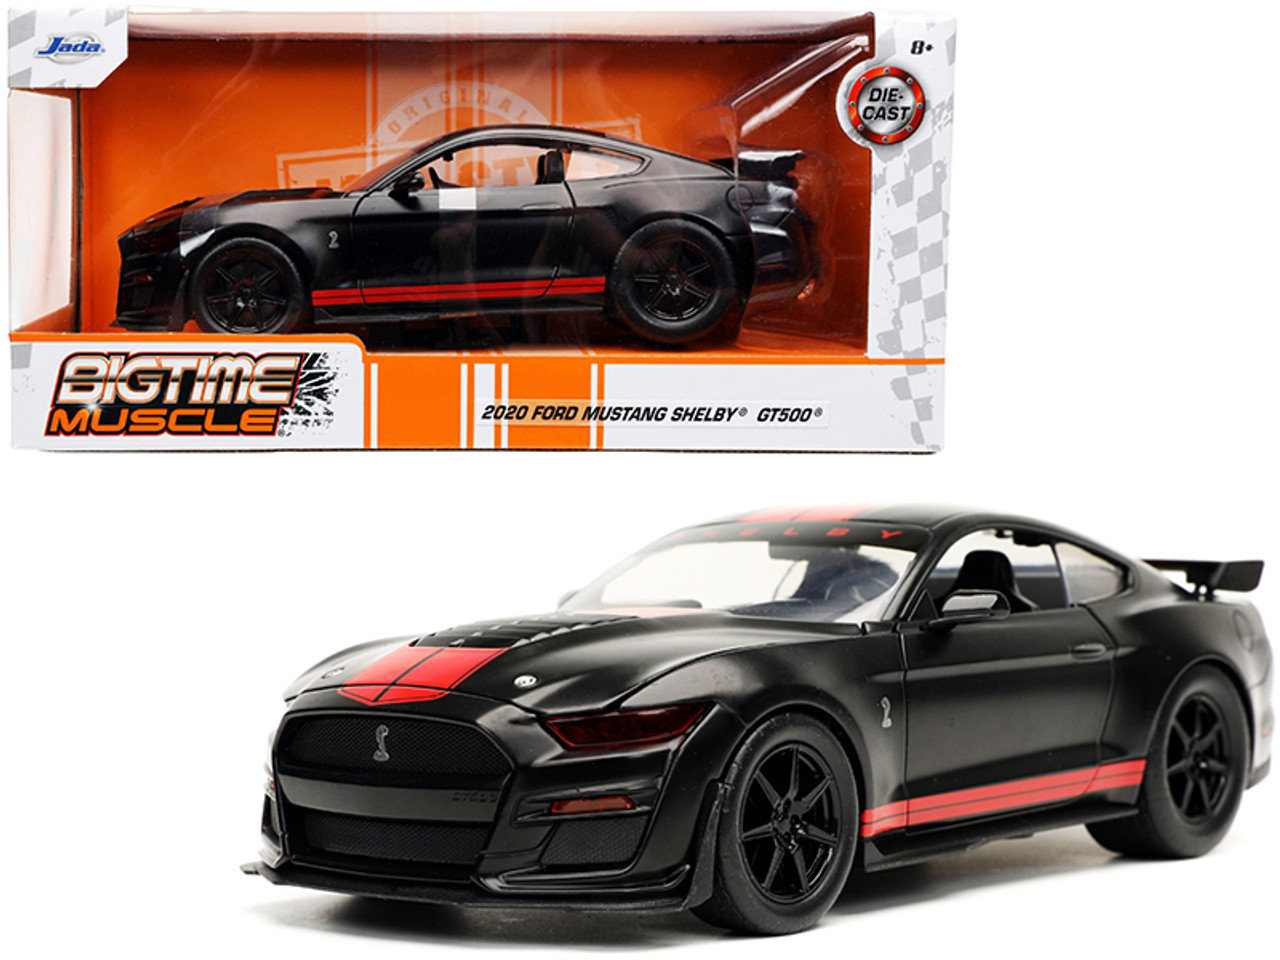 2020 Ford Mustang Shelby GT500 Matt Black with Red Stripes "Bigtime Muscle" Series 1/24 Diecast Model Car by Jada